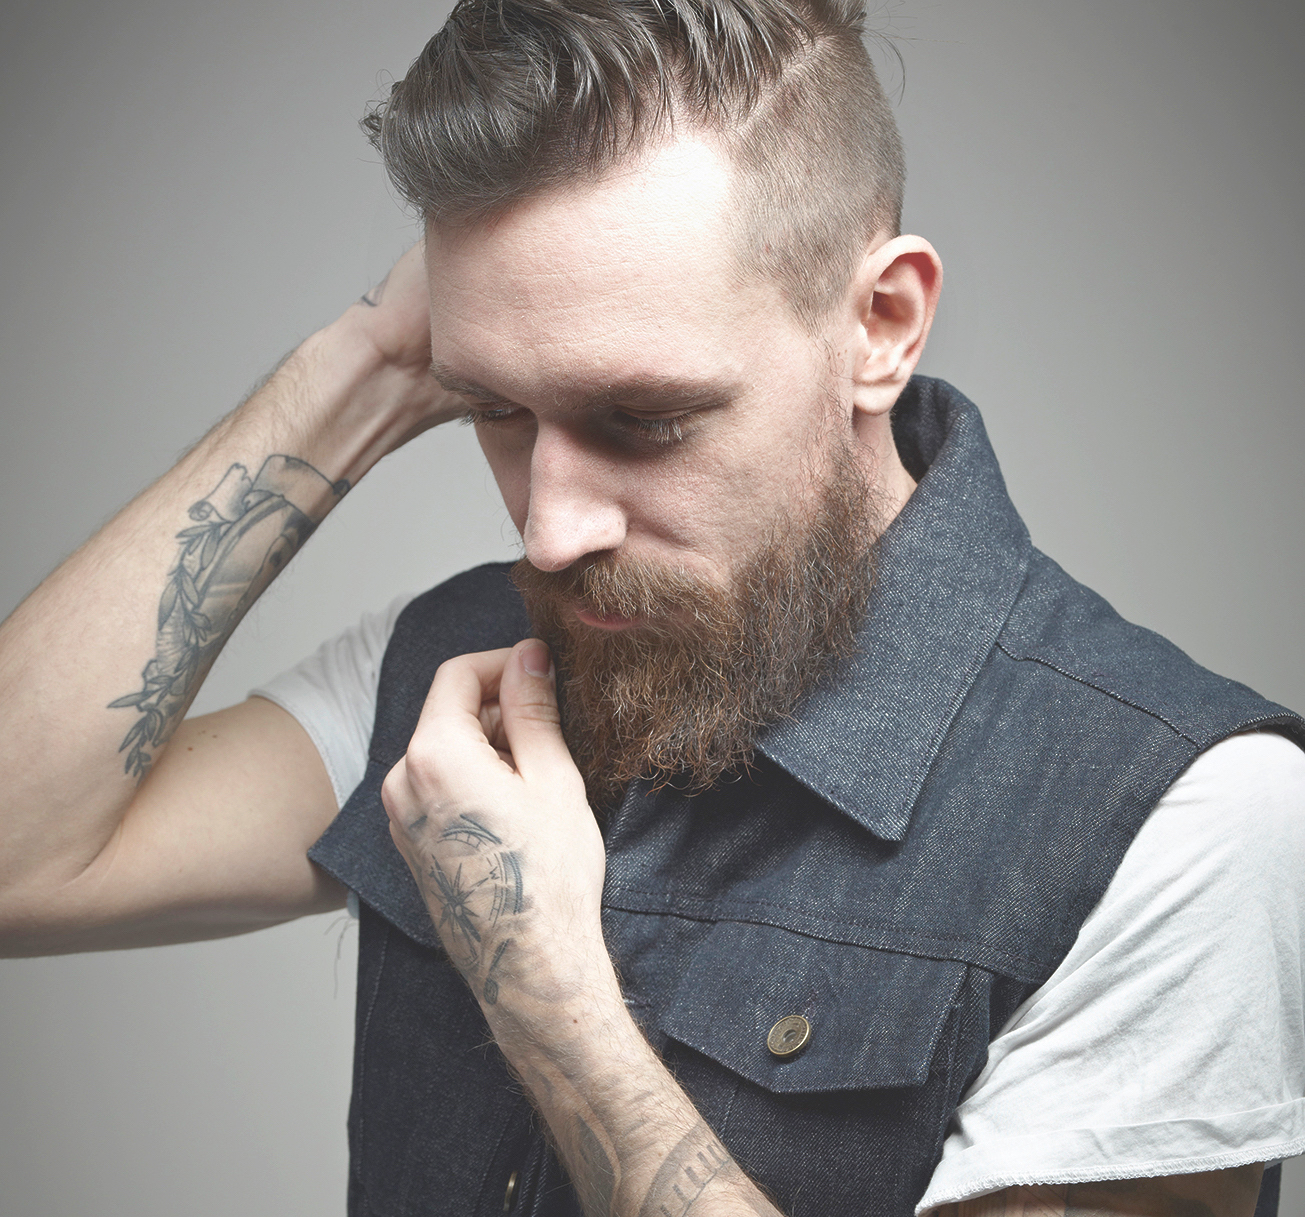 Haircuts for Thick Hair: 5 Styles for Men | All Things Hair US